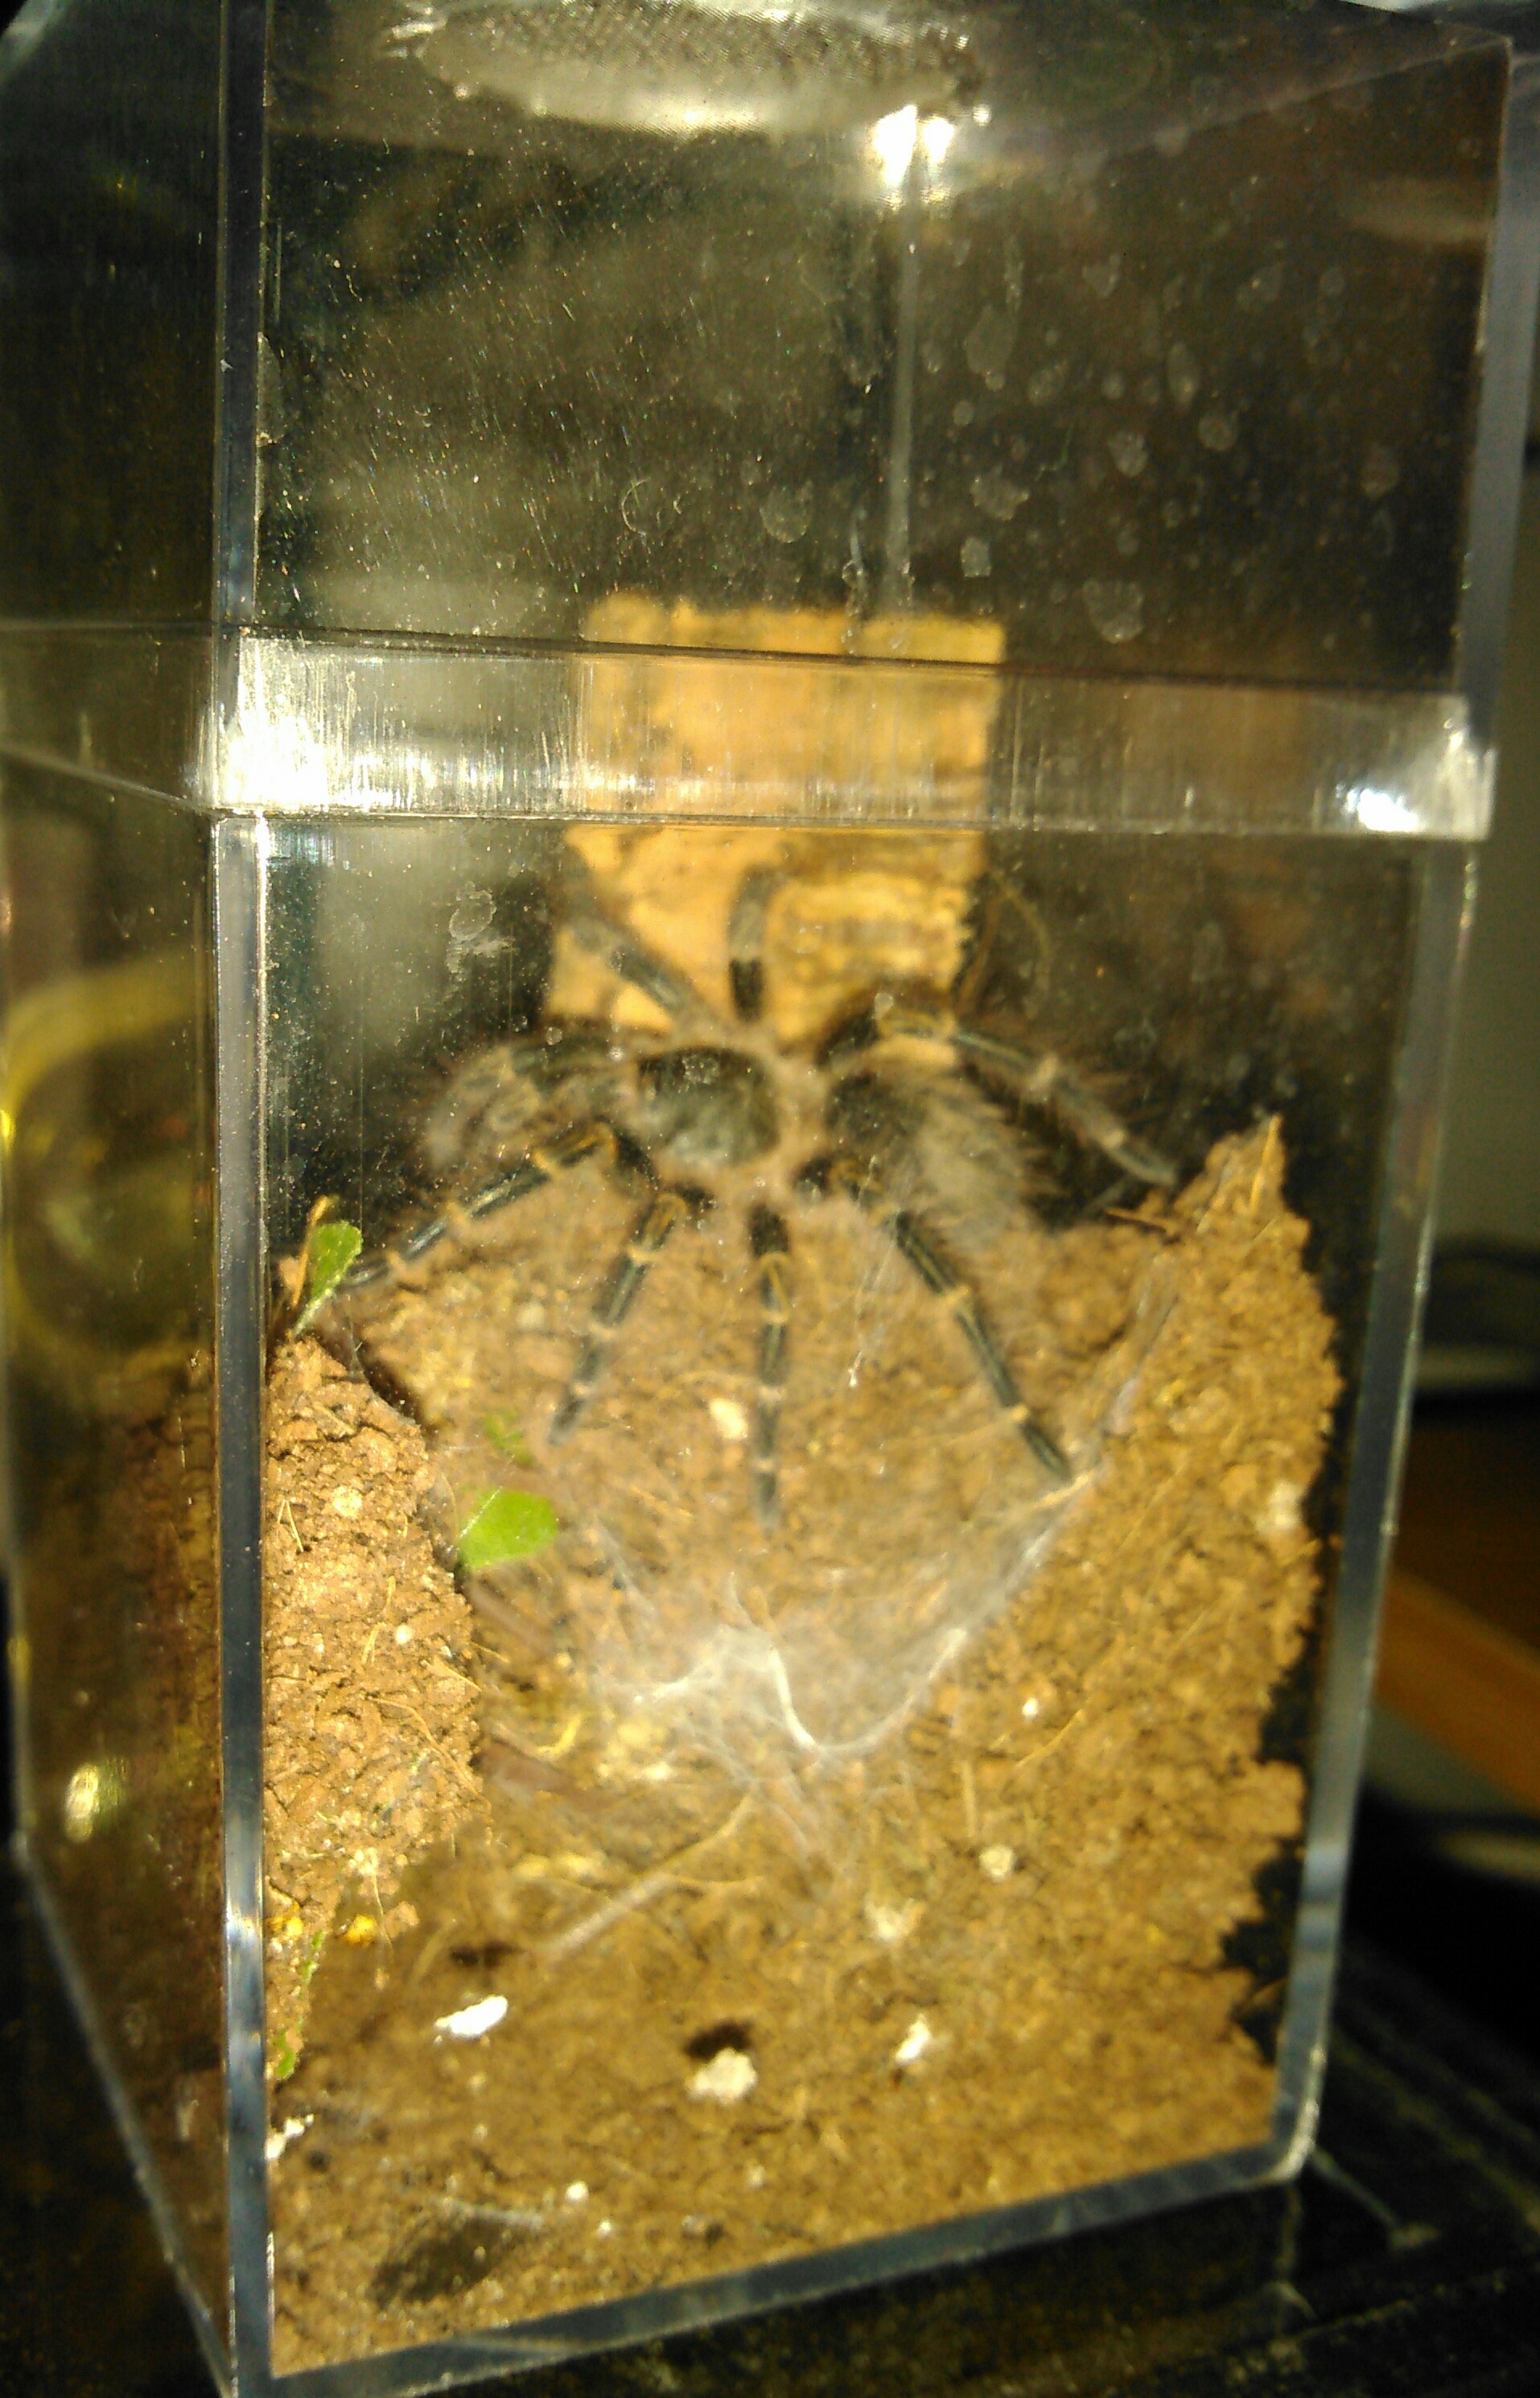 G.pulchripes freshly molted.